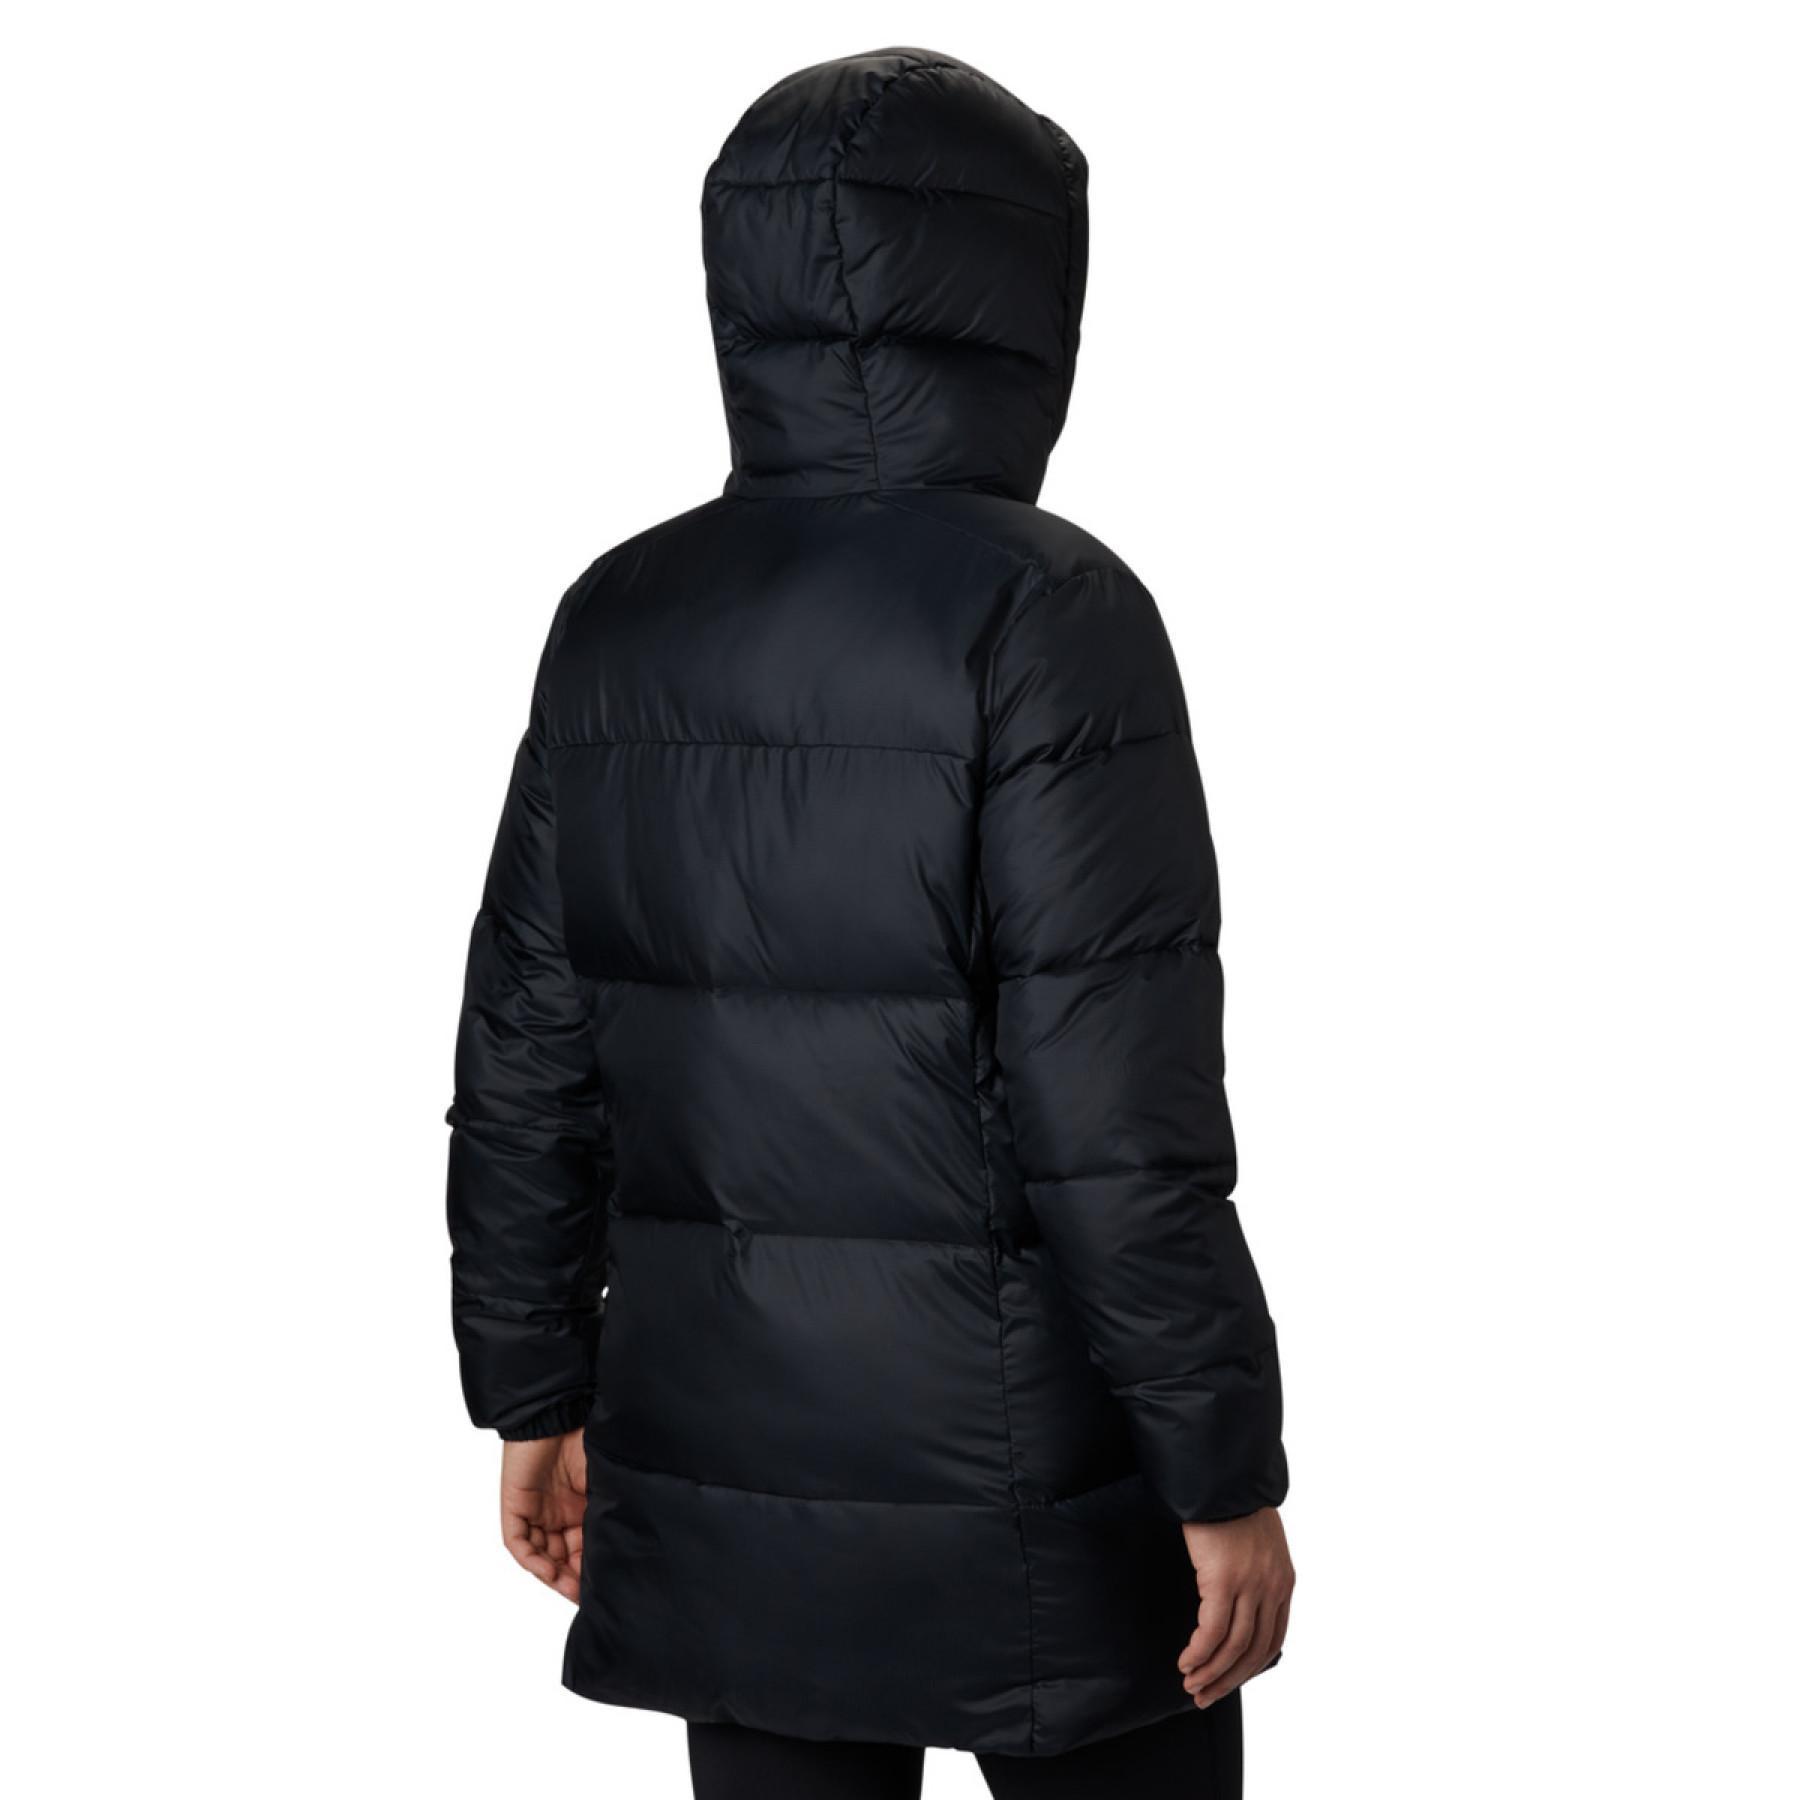 Hooded Puffer Jacket Columbia Puffect Mid